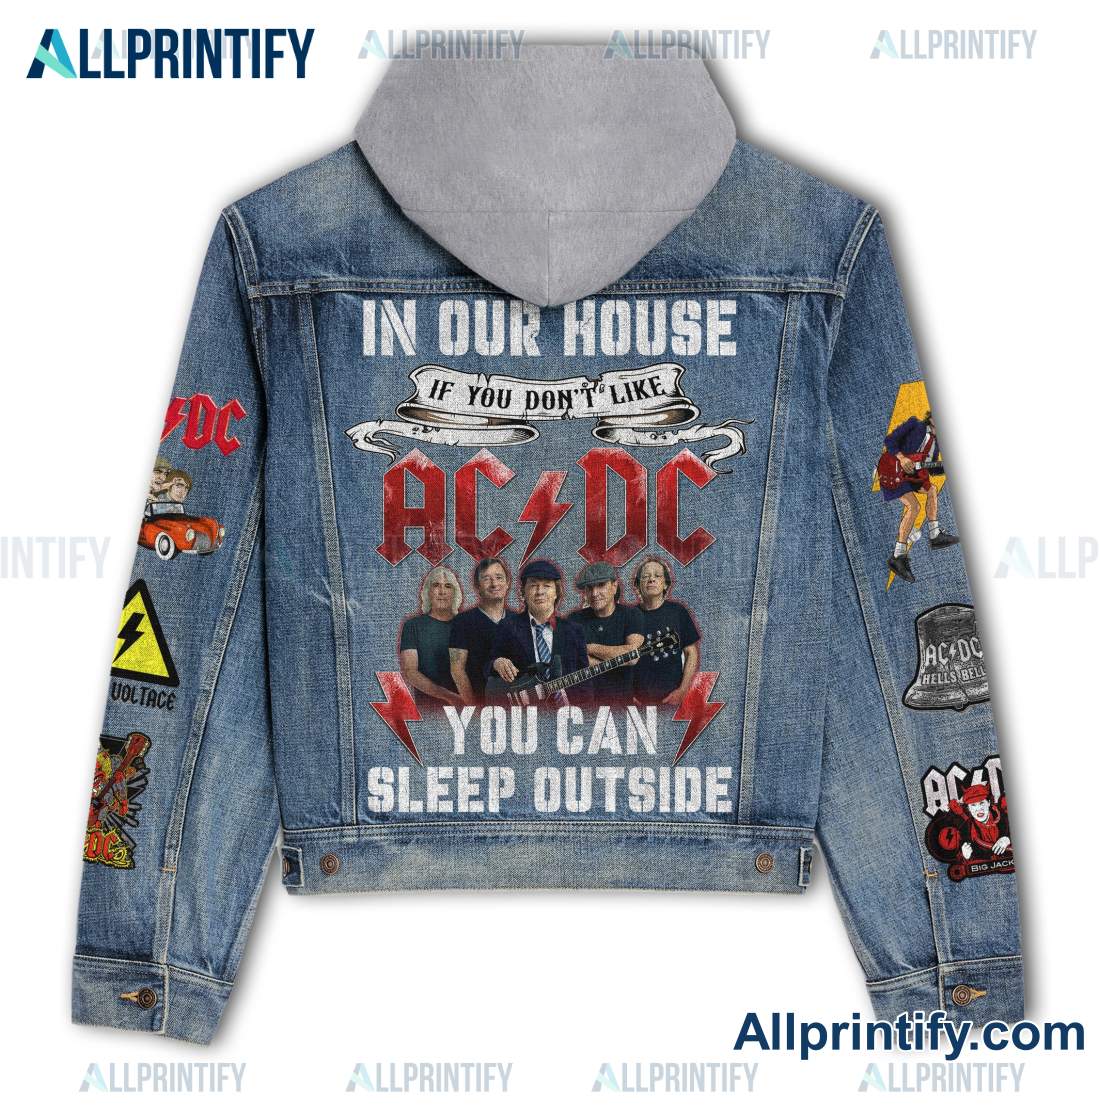 In Our House If You Don't Like Ac Dc You Can Sleep Outside Hooded Denim Jacket b